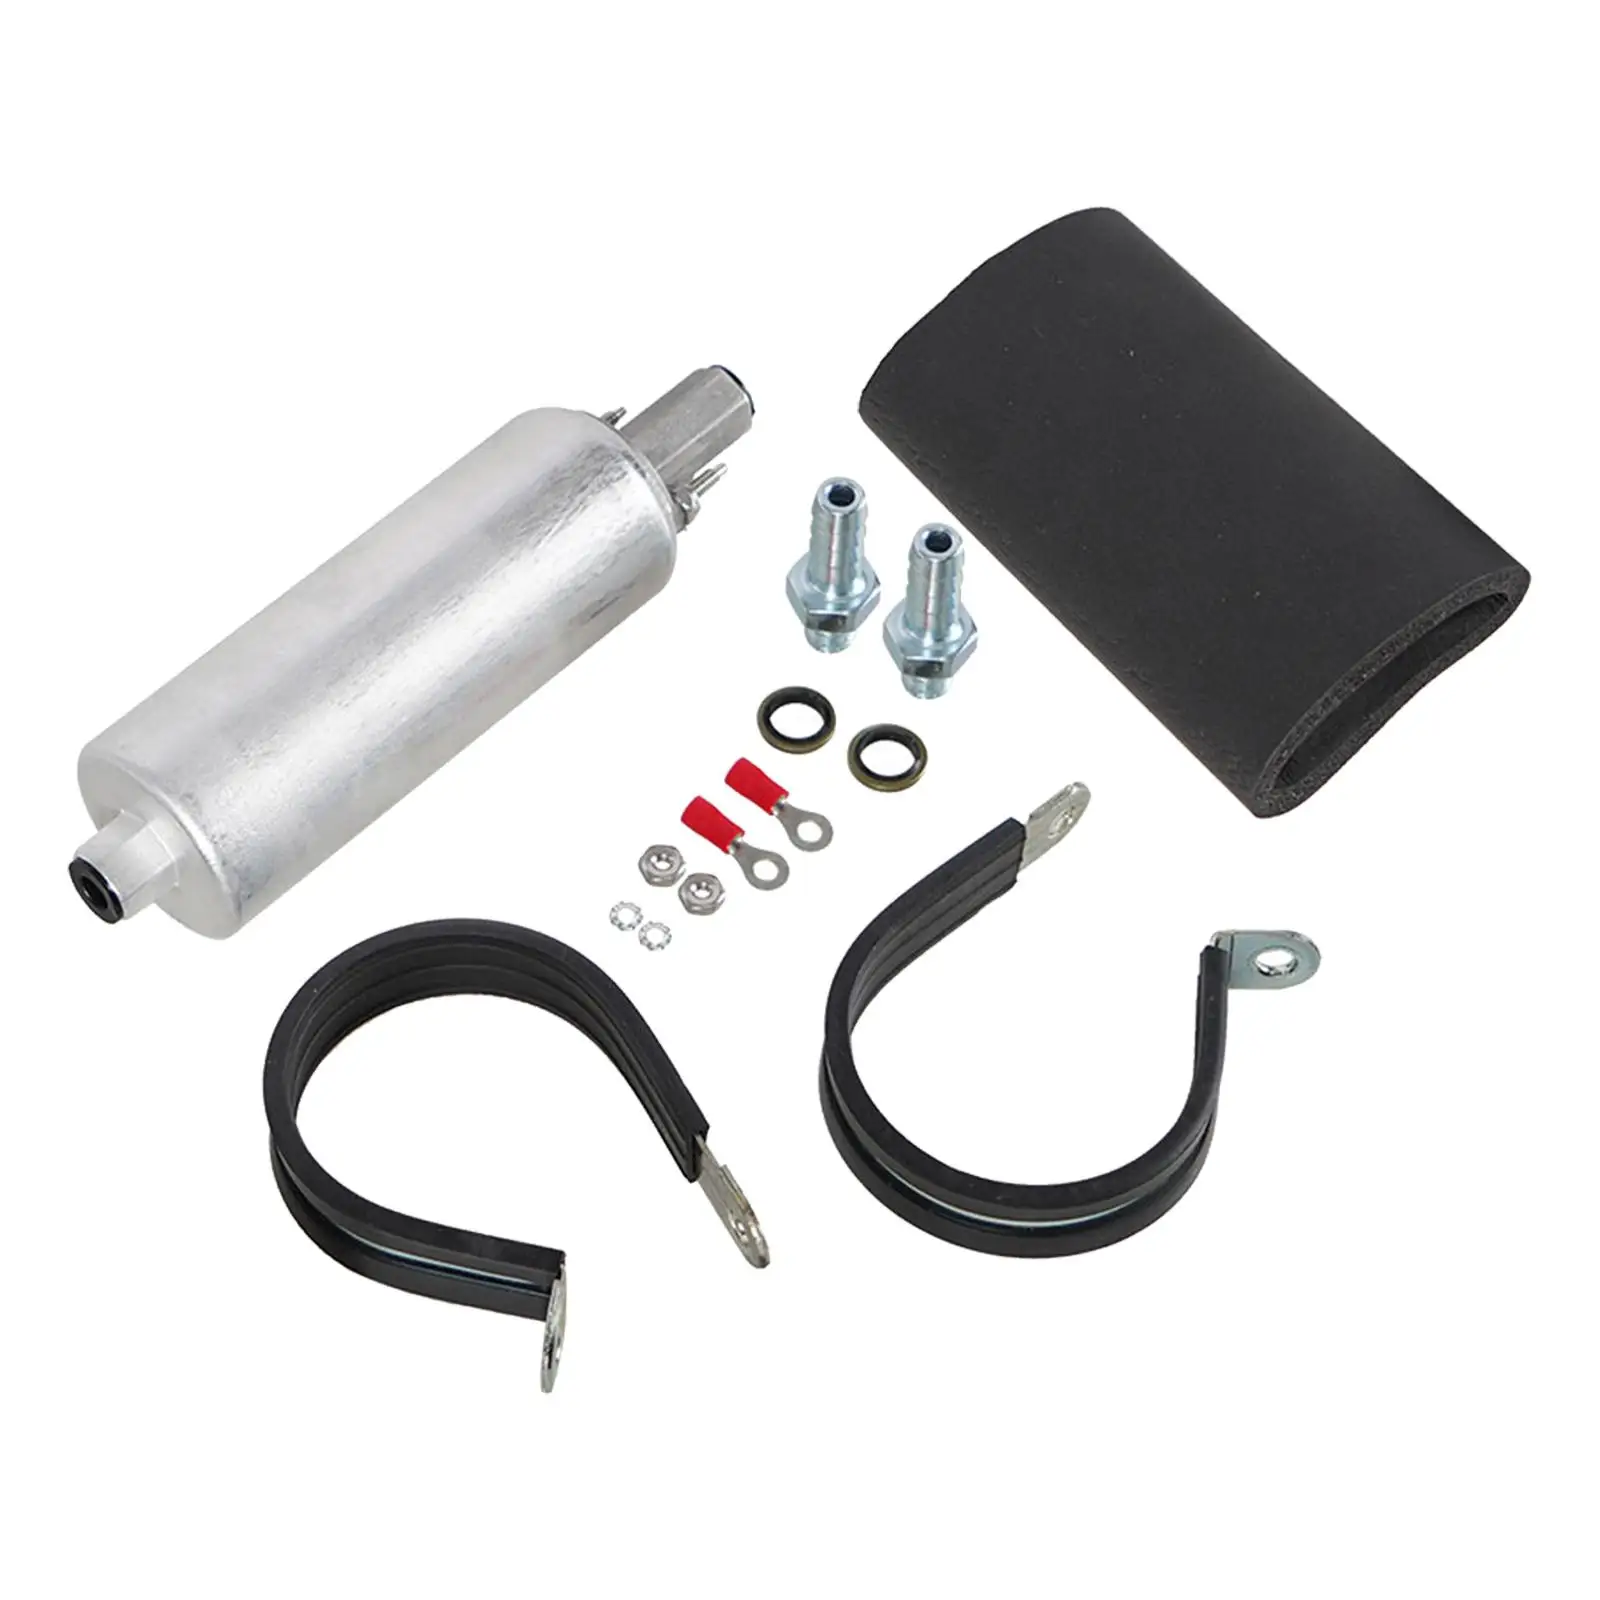 Inline Fuel Pump 255Lph with Installation Kit Gsl392-400-939 Direct Replaces